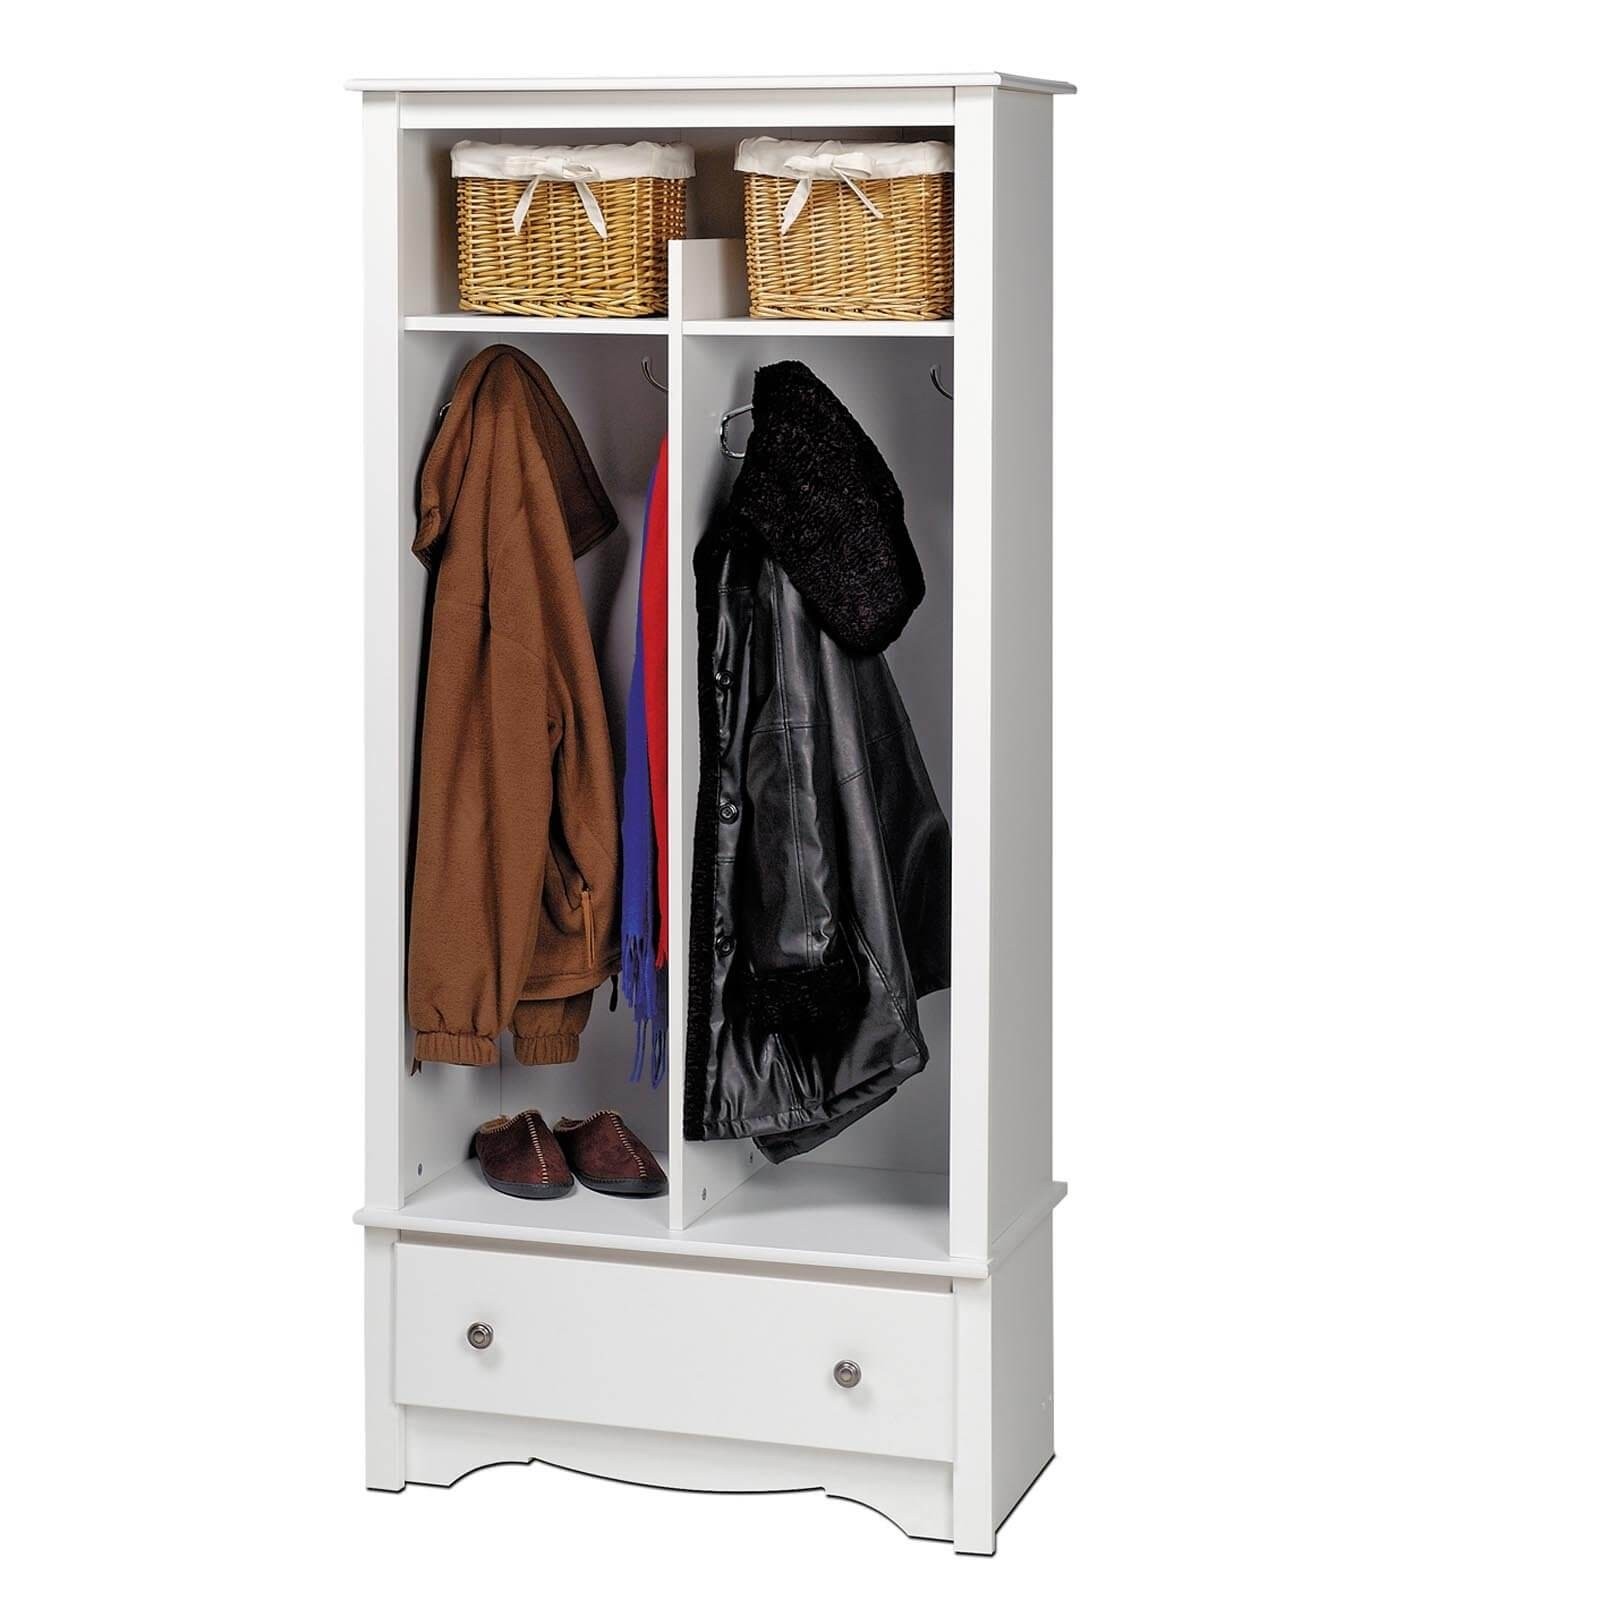 Shoe and coat storage solutions